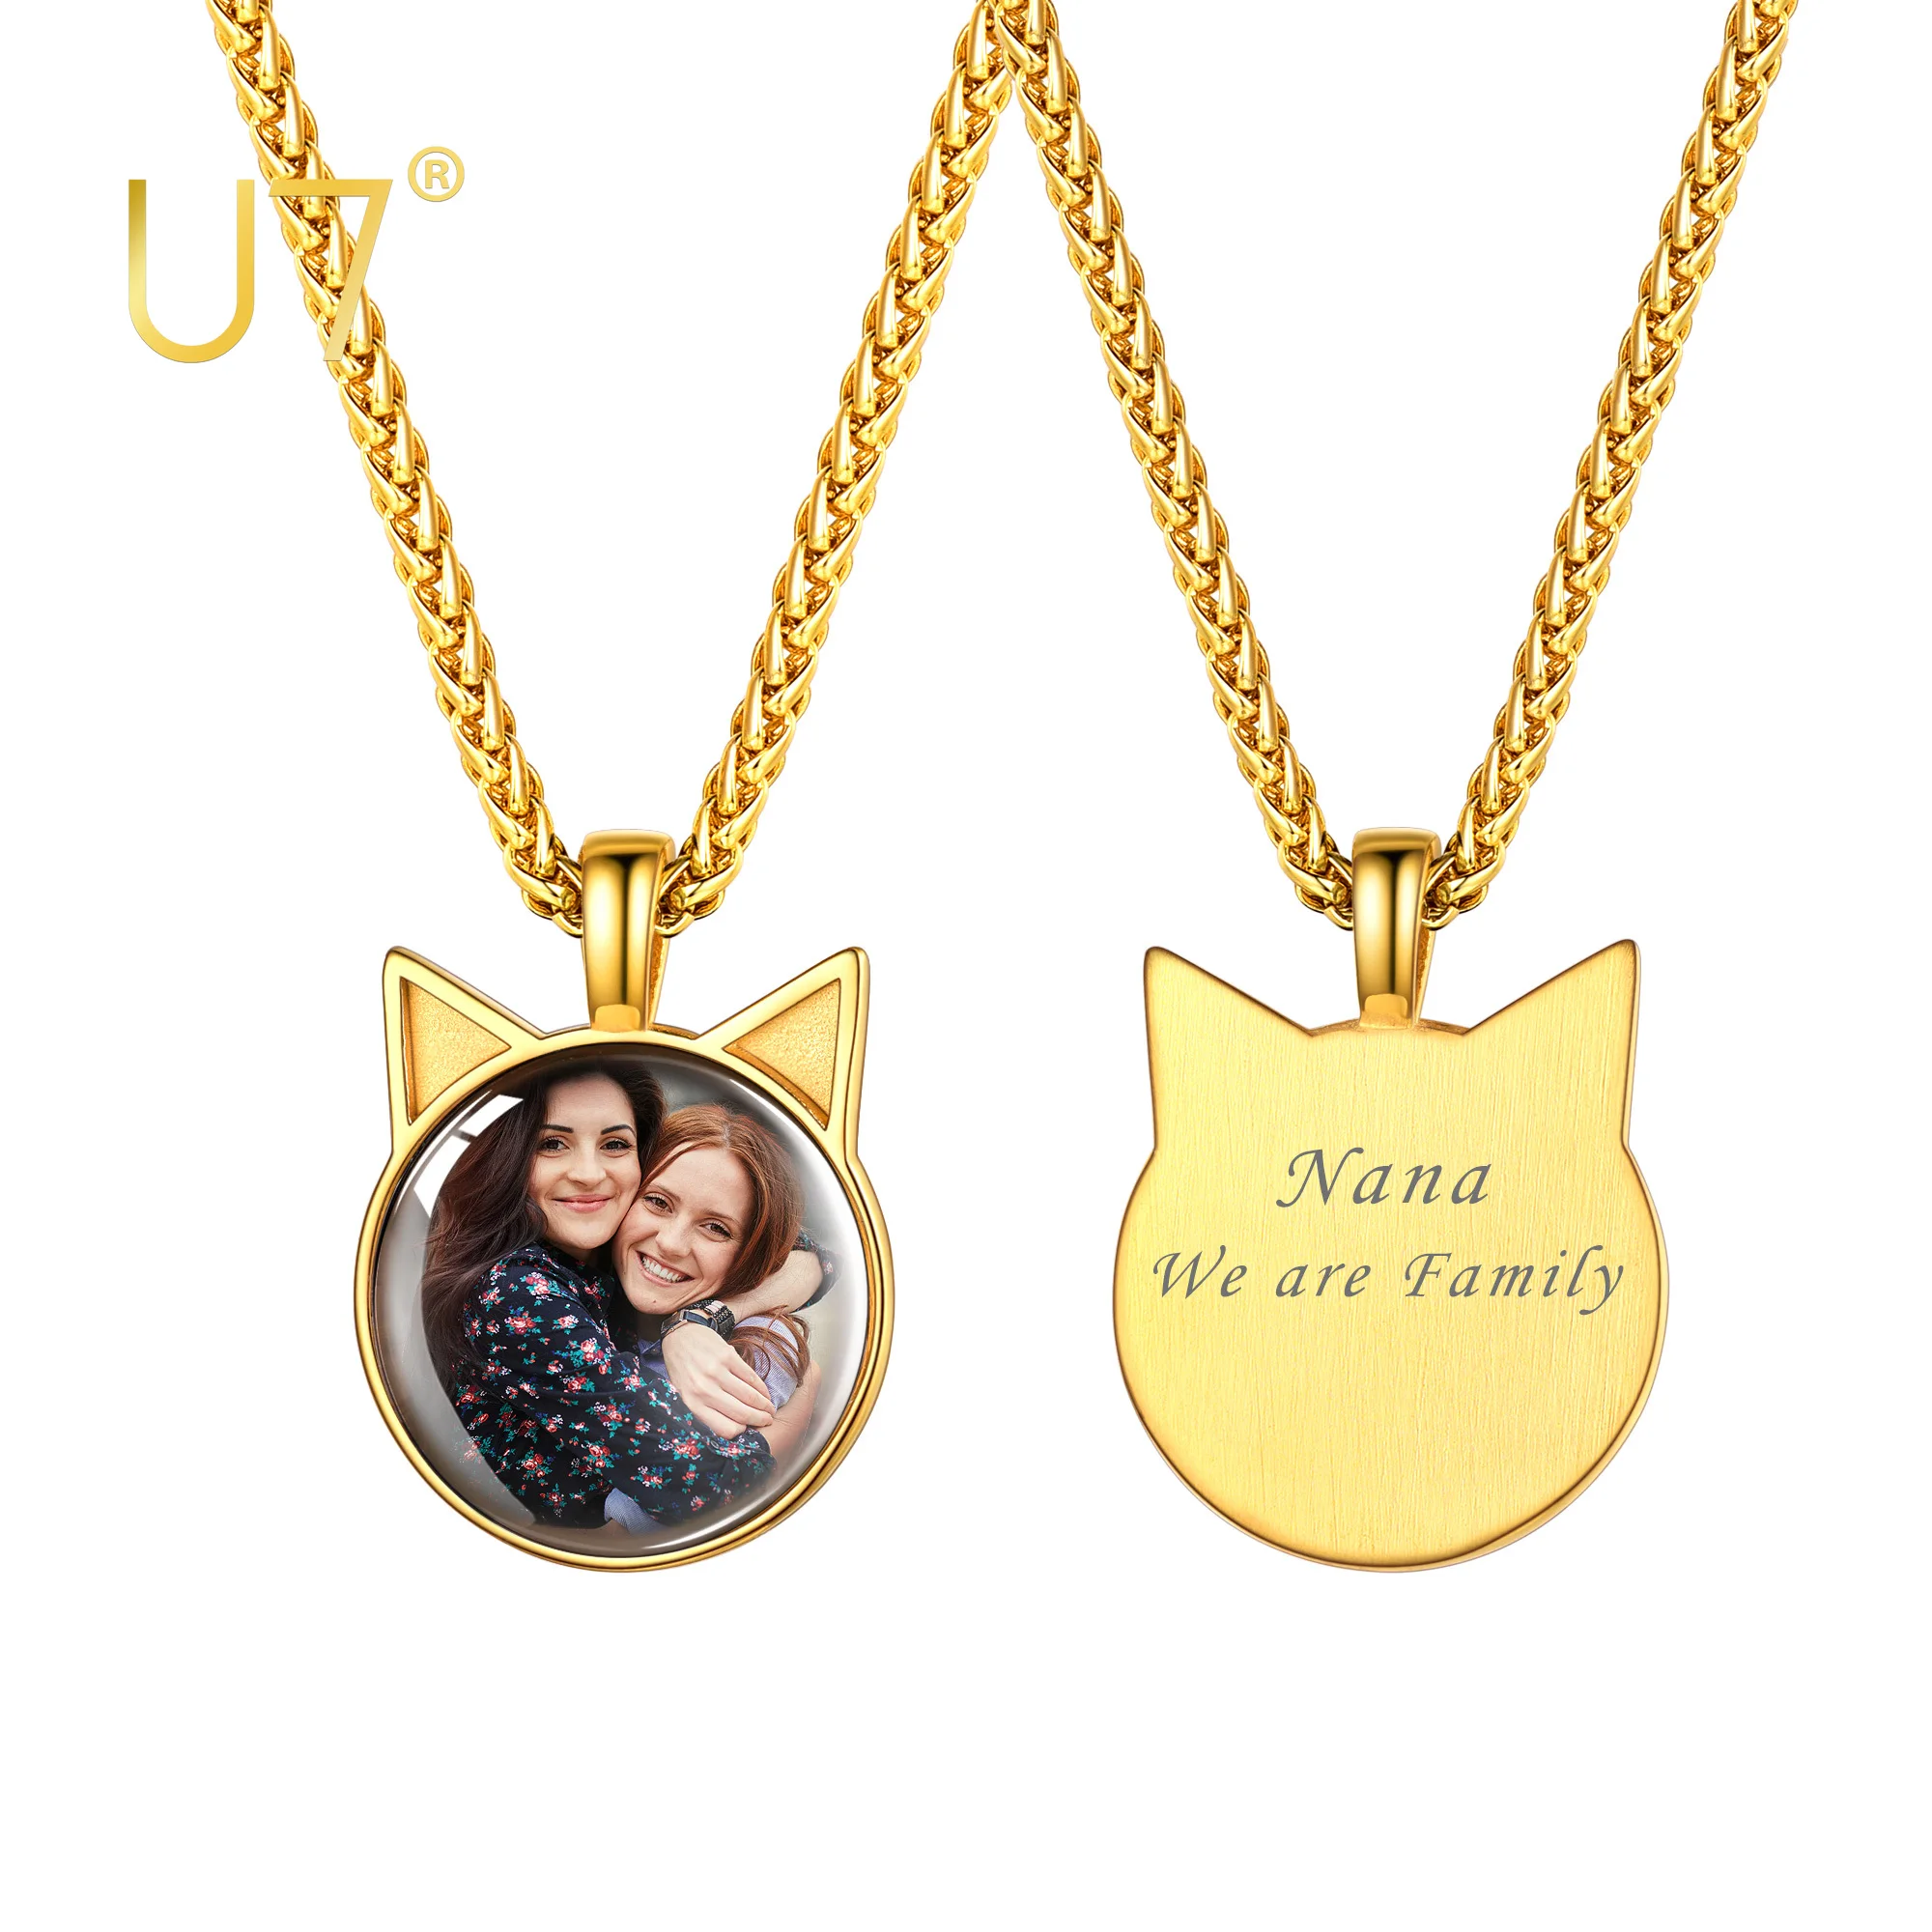 U7 Convex Photo Necklace Personalized Jewelry Stainless Steel Round Cat Ear Shape Pendant Custom with Image Picture